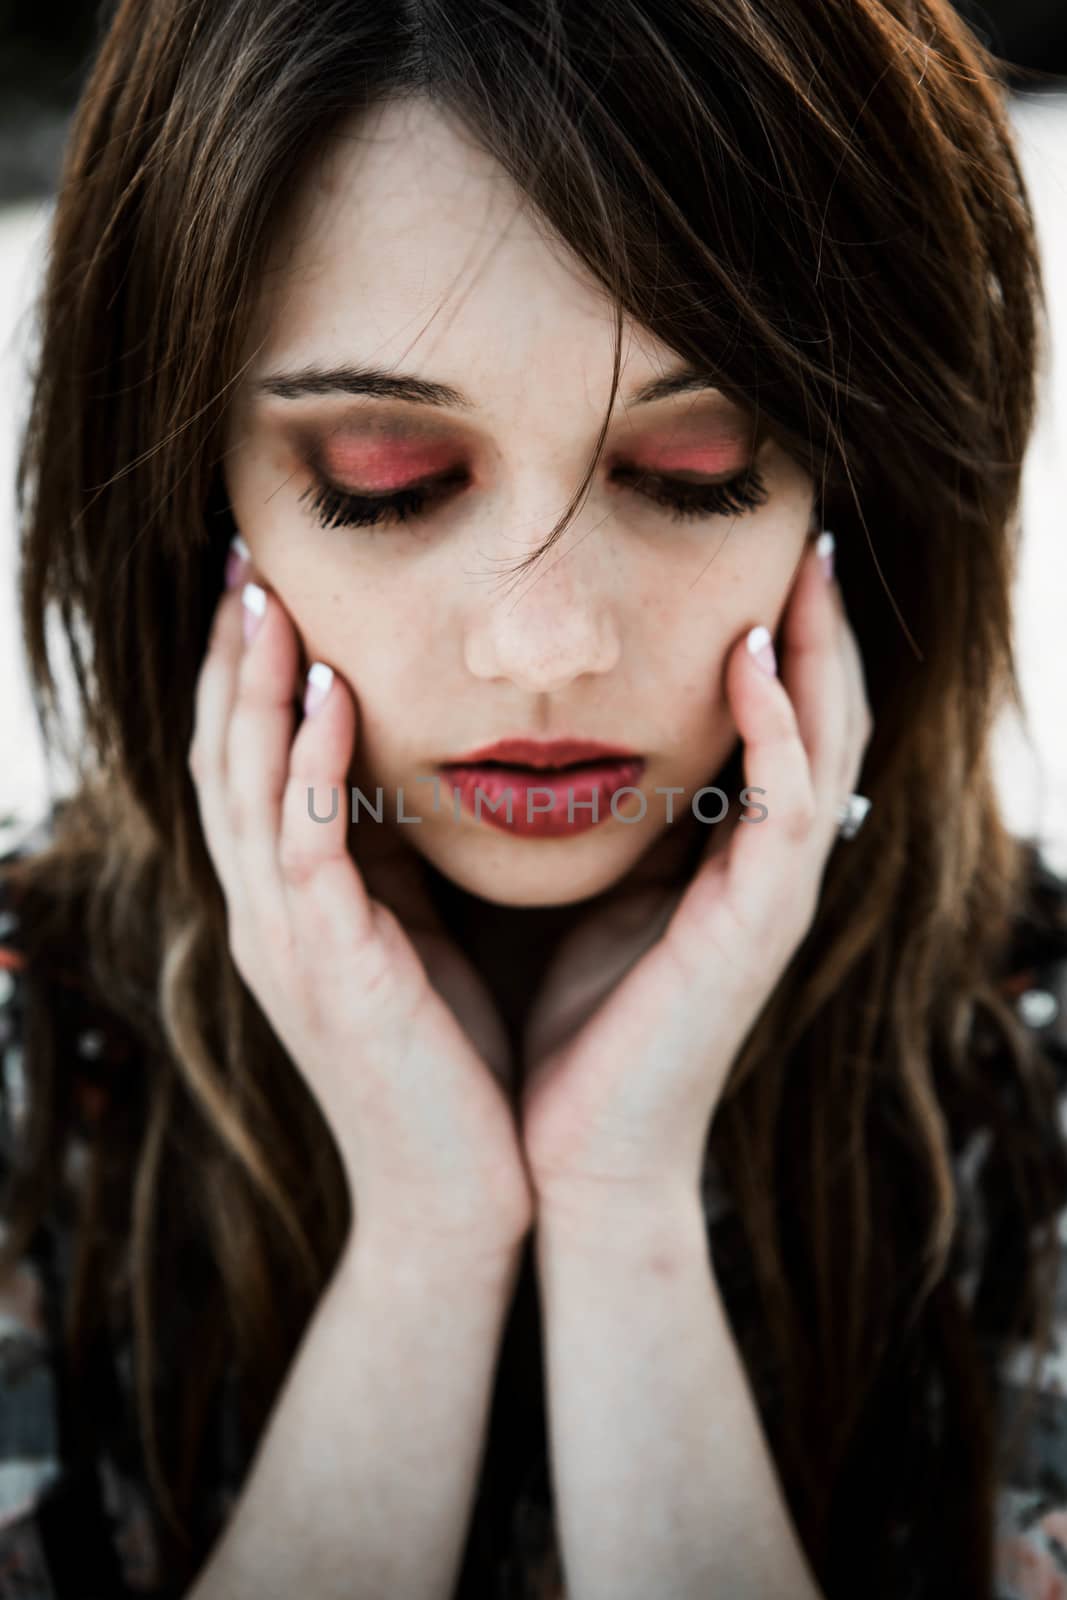 Young lady with beautiful red and eye makeup.